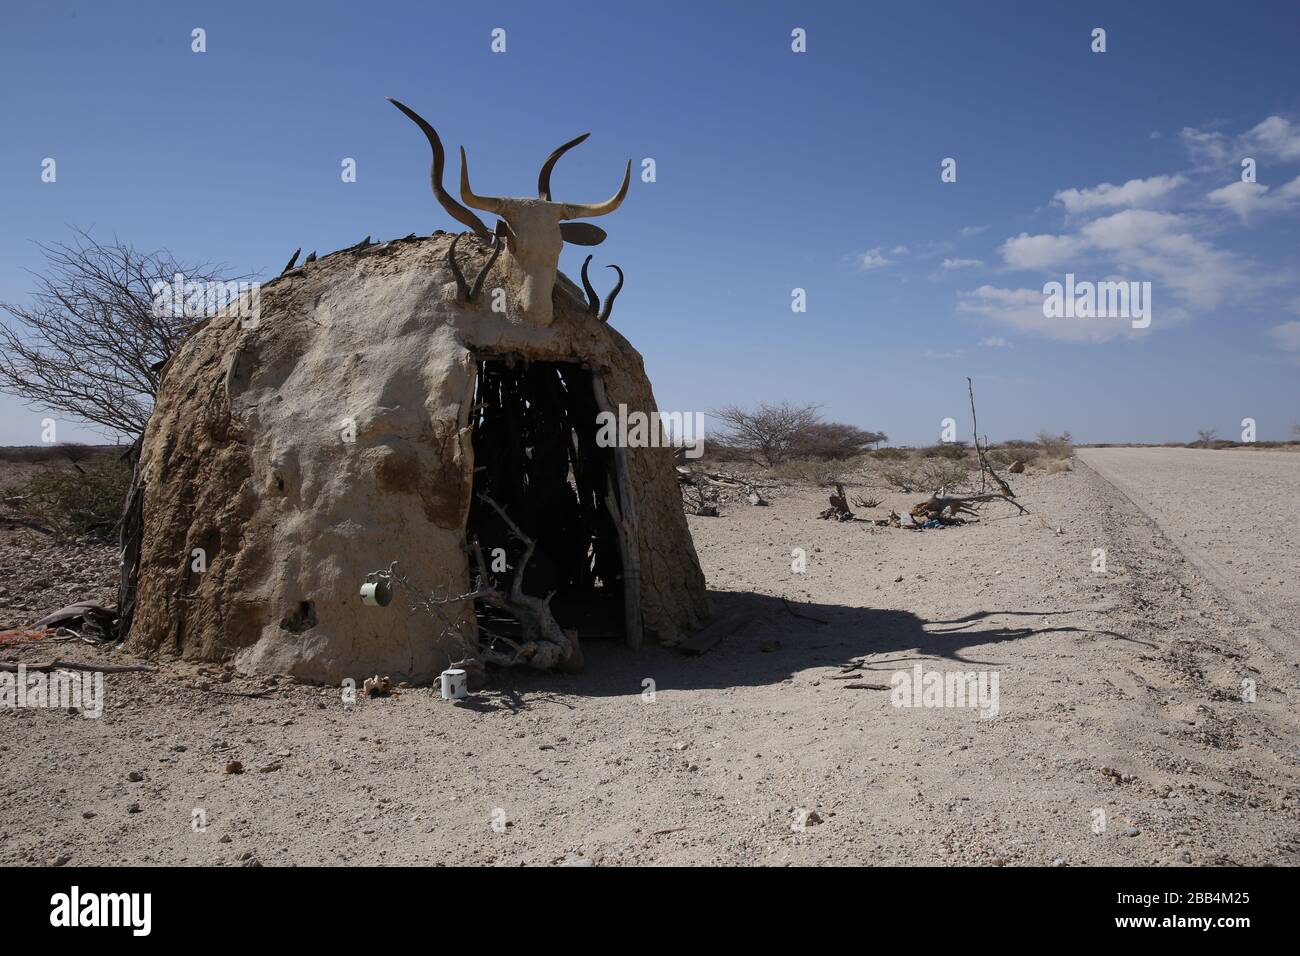 Hut made from sticks and mud at the side of a road in Namibia Stock Photo